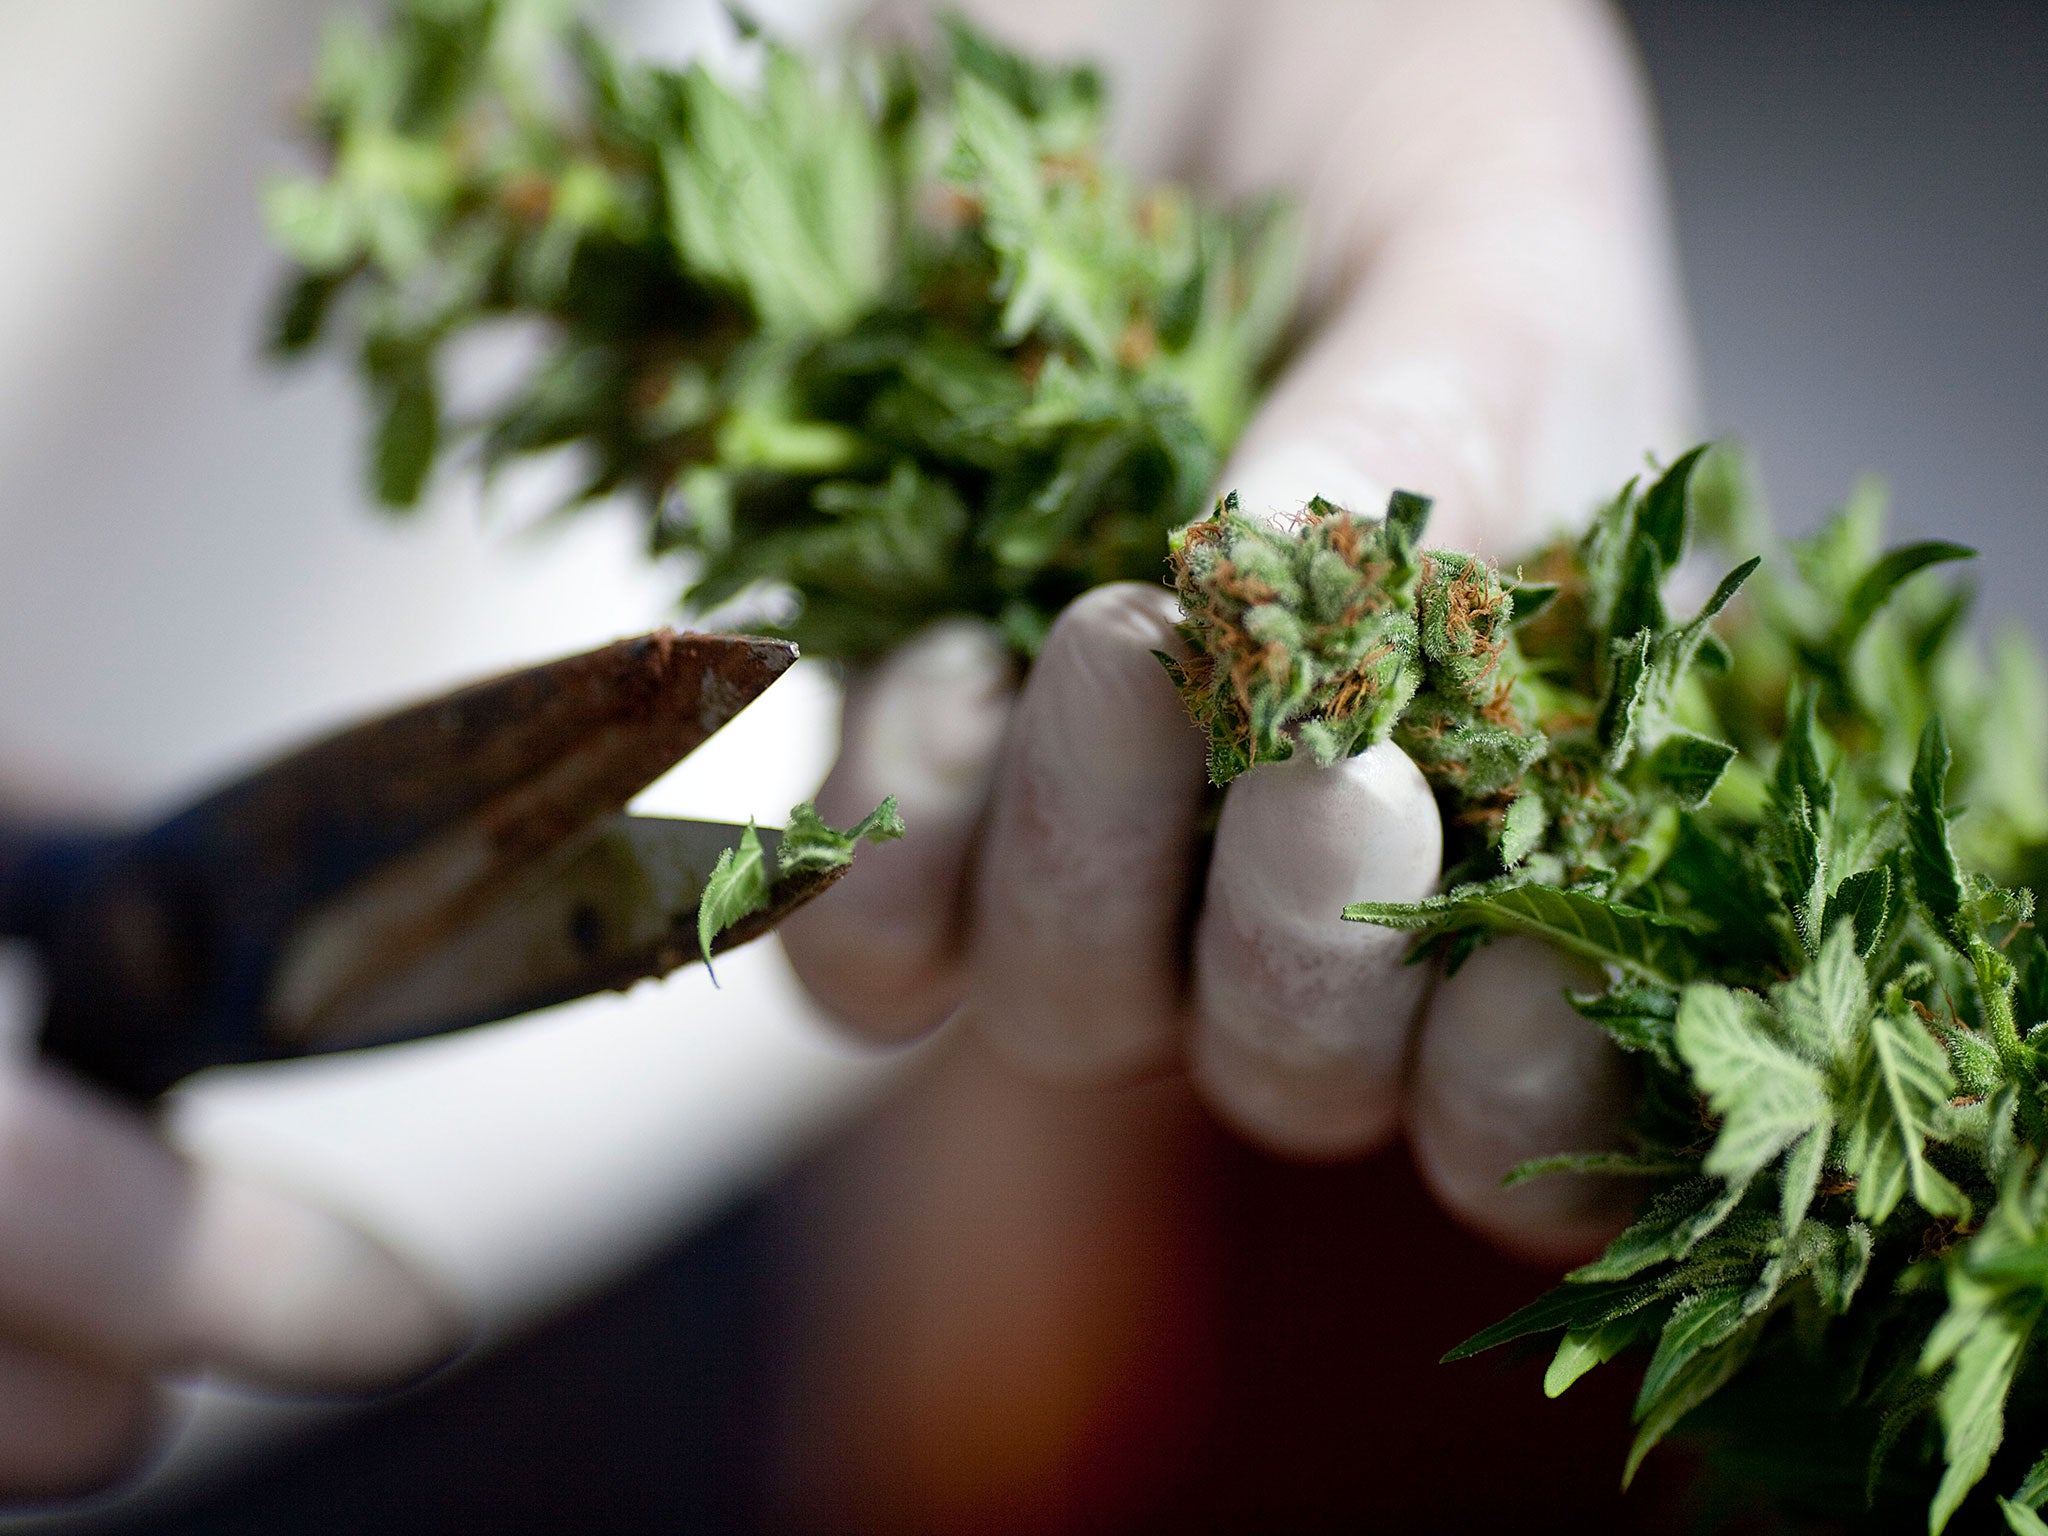 A worker trims a cannabis plant at a legal facility in Israel